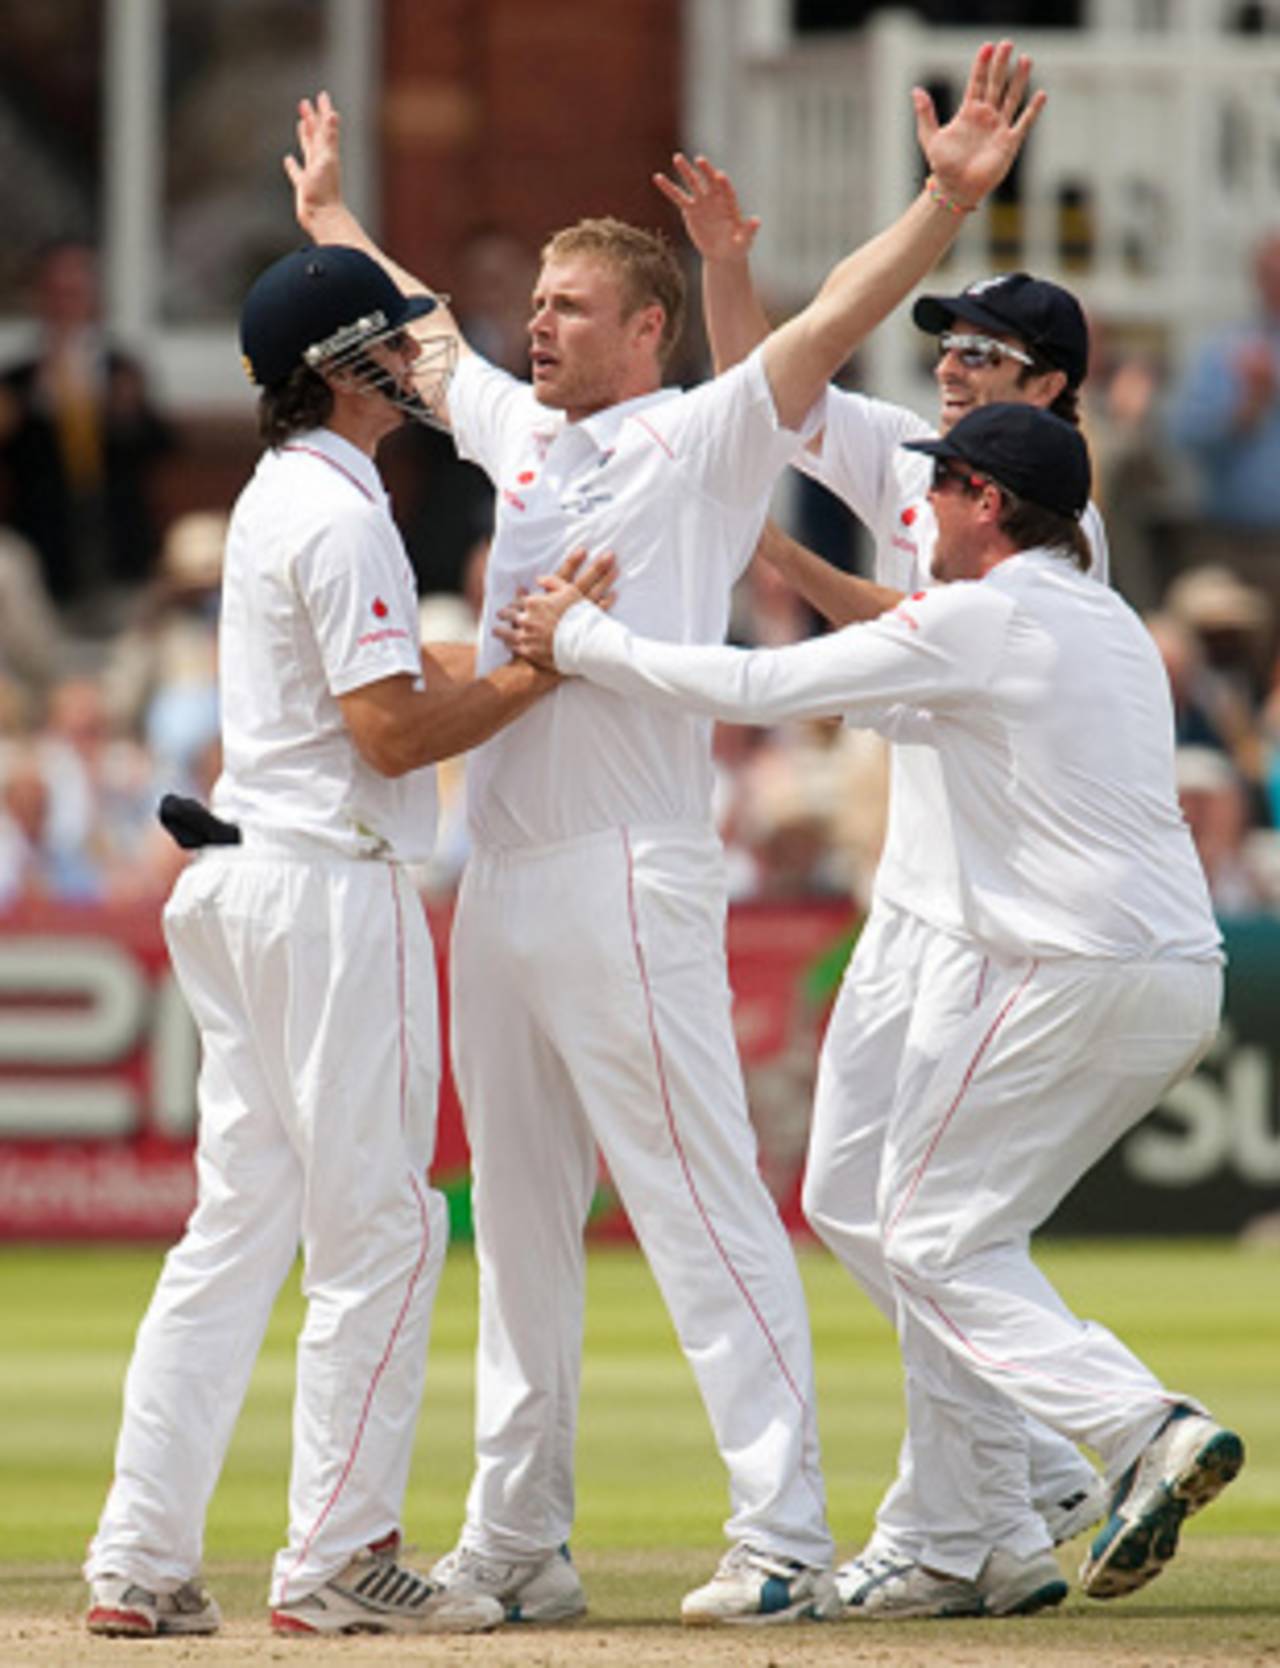 Andrew Flintoff, arms outstretched, celebrates one of his five wickets on his final appearance in a Lord's Test, England v Australia, 2nd Test, Lord's, 5th day, July 20, 2009